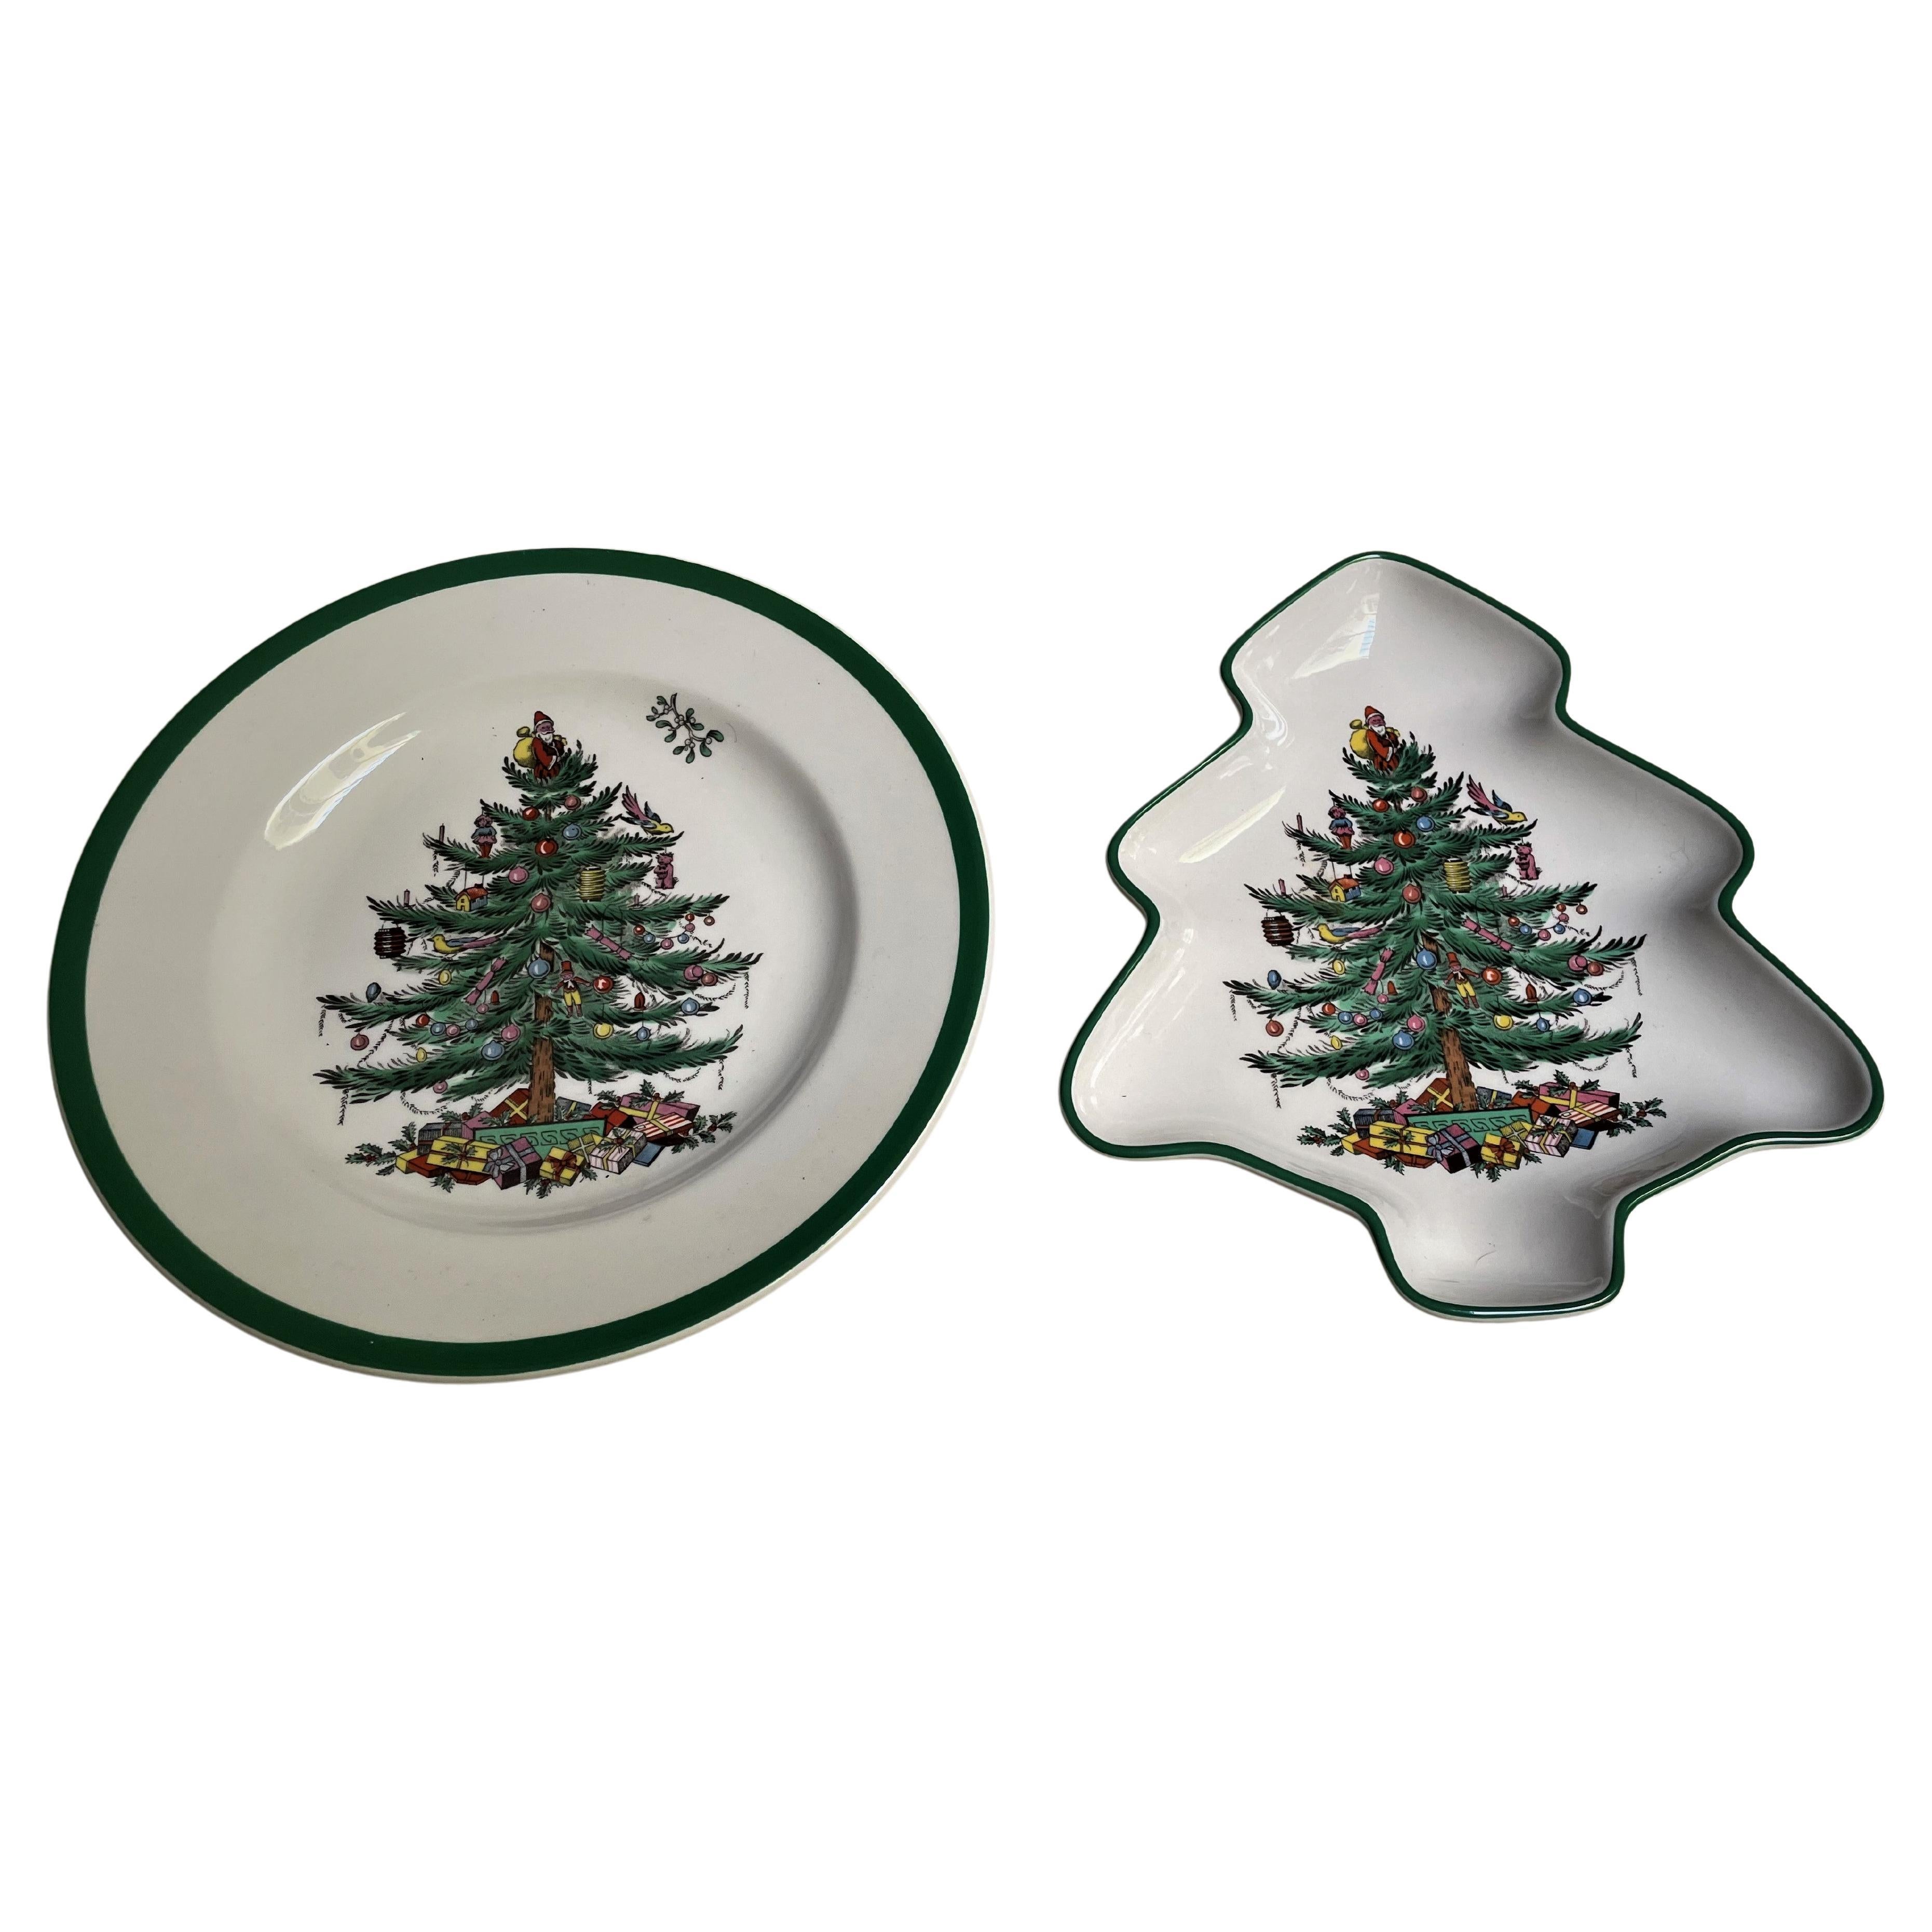 2 Spode "Christmas Tree" Shaped Nut Candy Condiment Plate Bowl #38 #21 Set